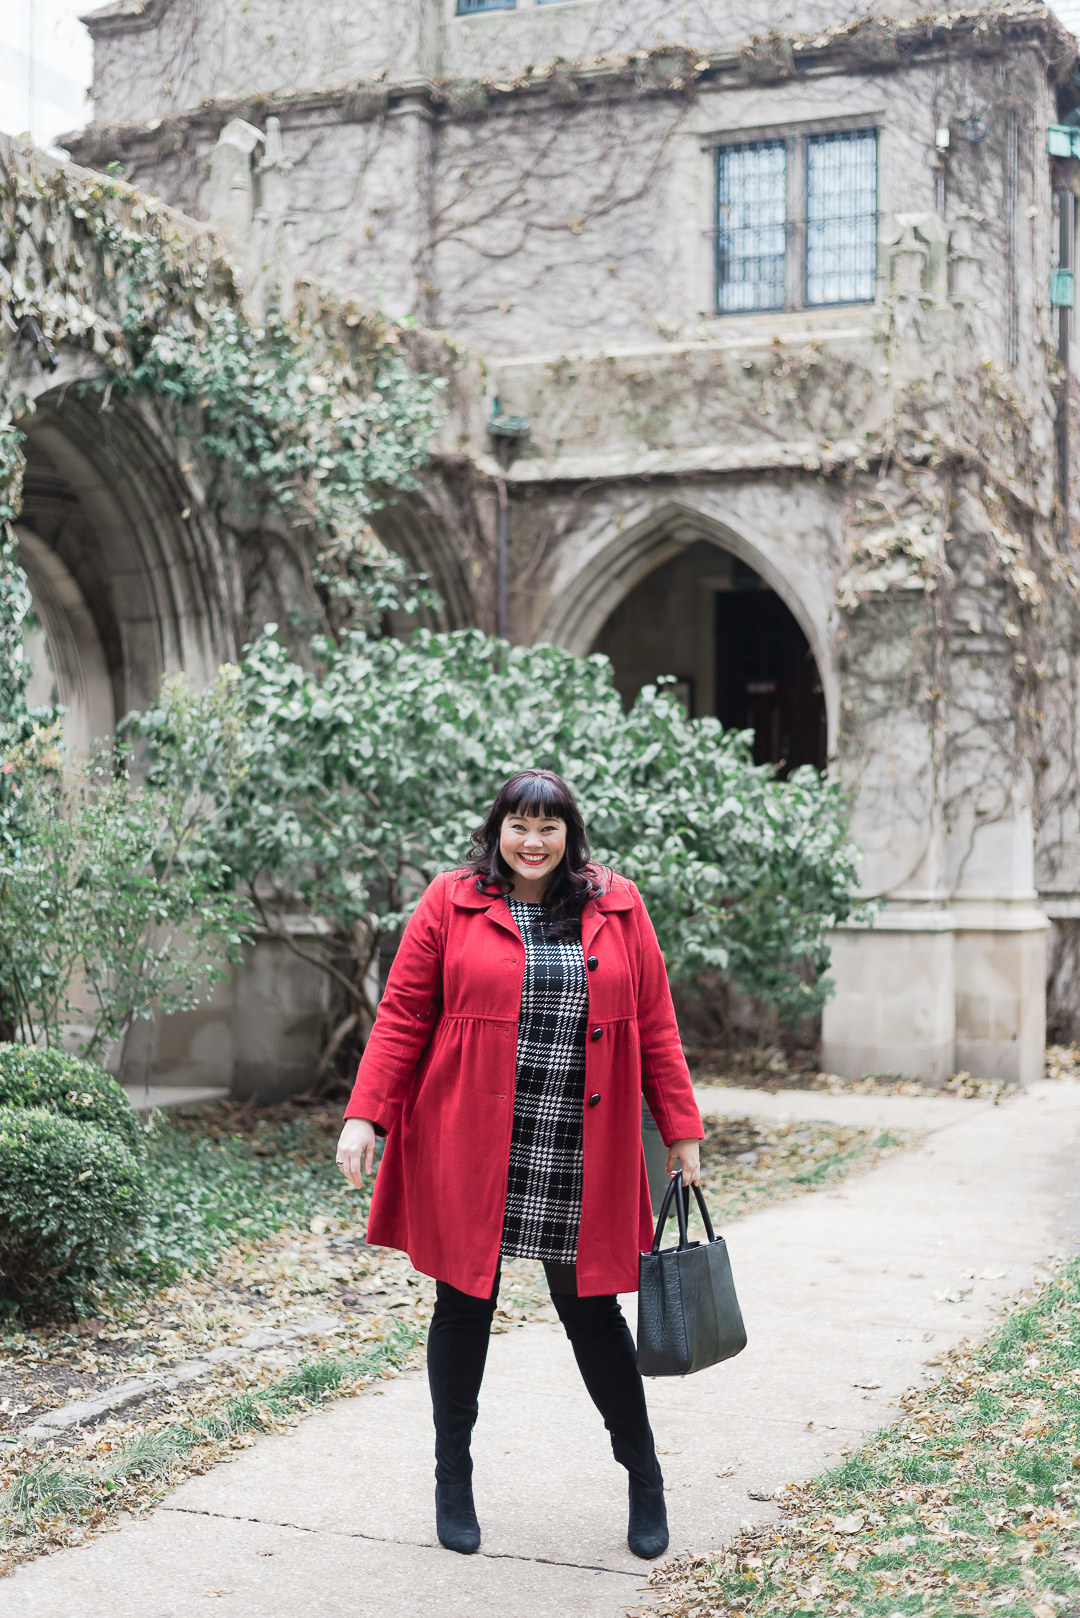 Just My Size Plus Size Dresses, Plaid, Bell sleeves, Plus Size Style, Plus Size Fashion, Style Plus Curves, Chicago Blogger, Chicago Plus Size Blogger, Plus Size Blogger, Amber McCulloch